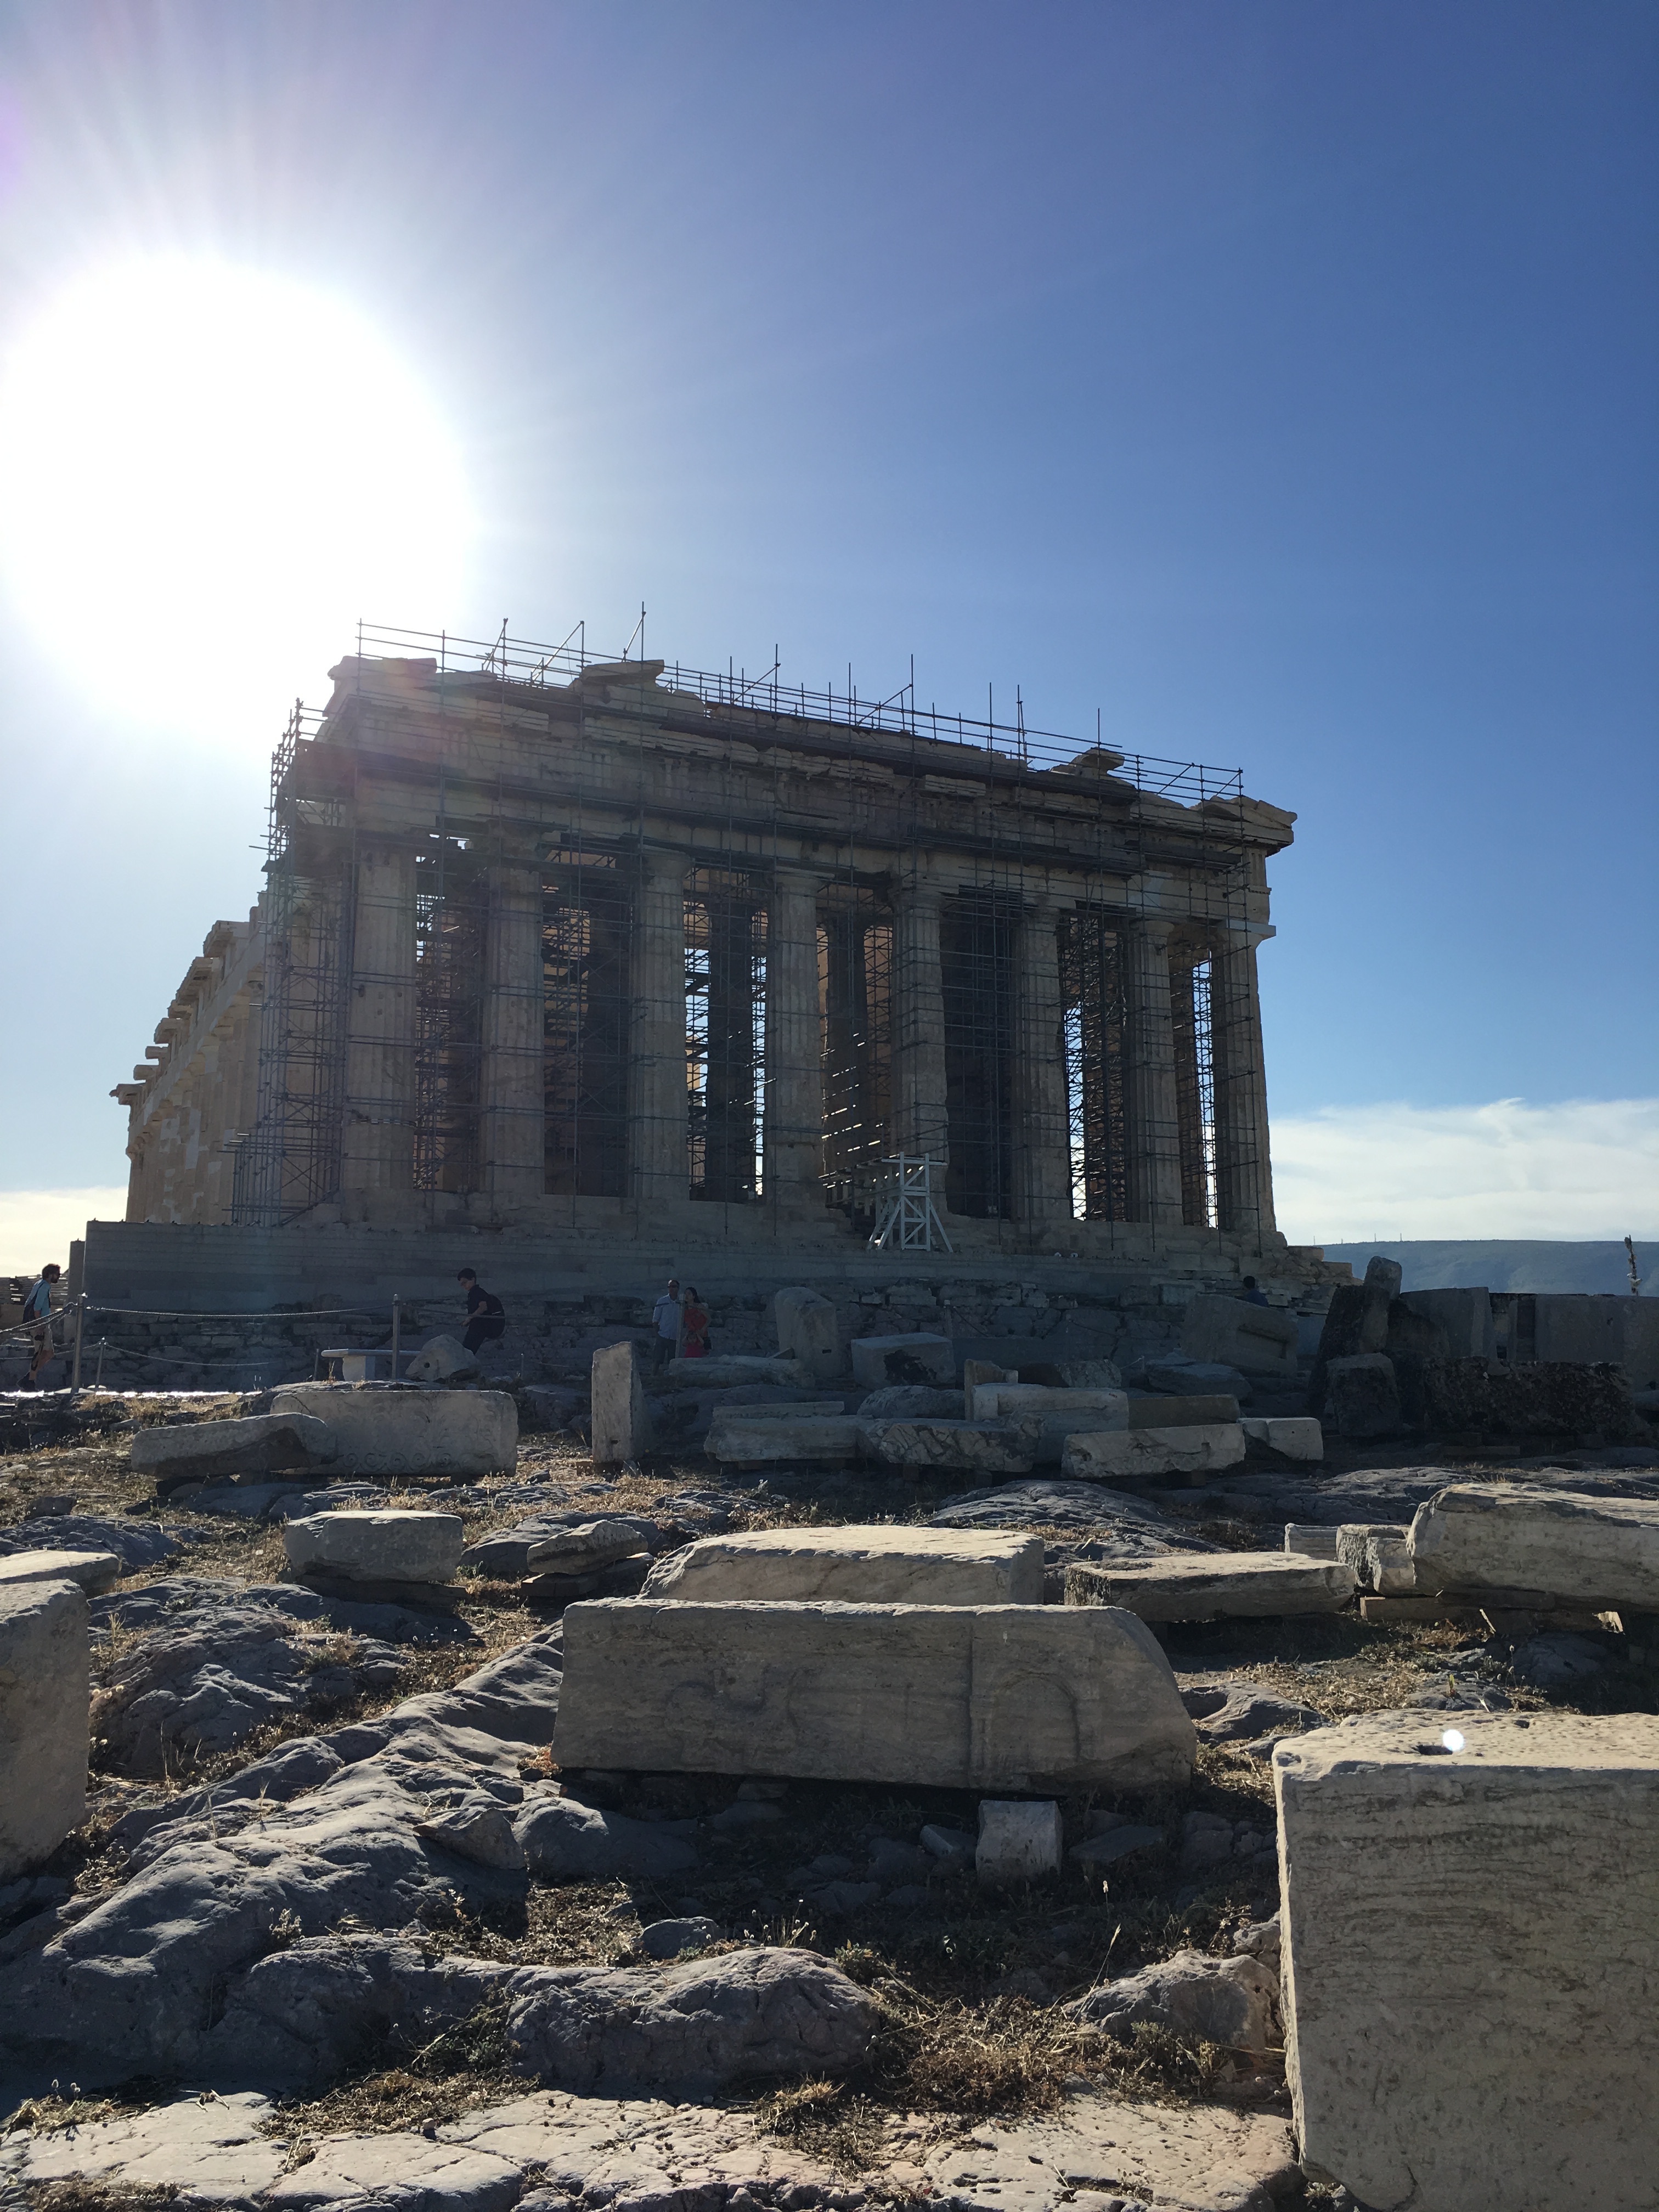 The Parthenon. Brownell, May 2019.